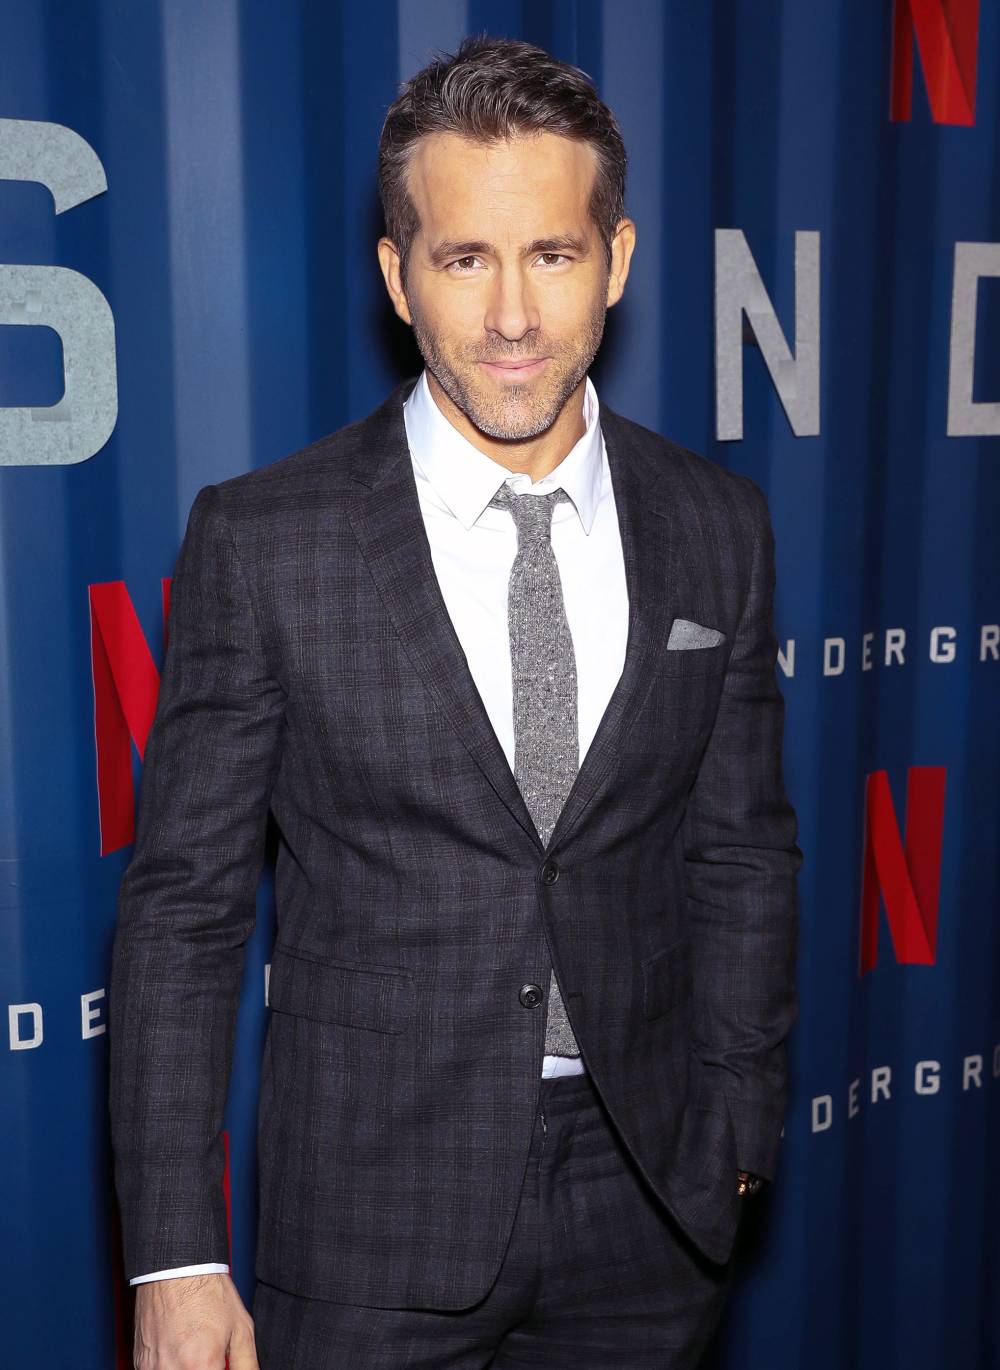 Ryan Reynolds Rat Outs His Mom For Using "Urinal Cake"